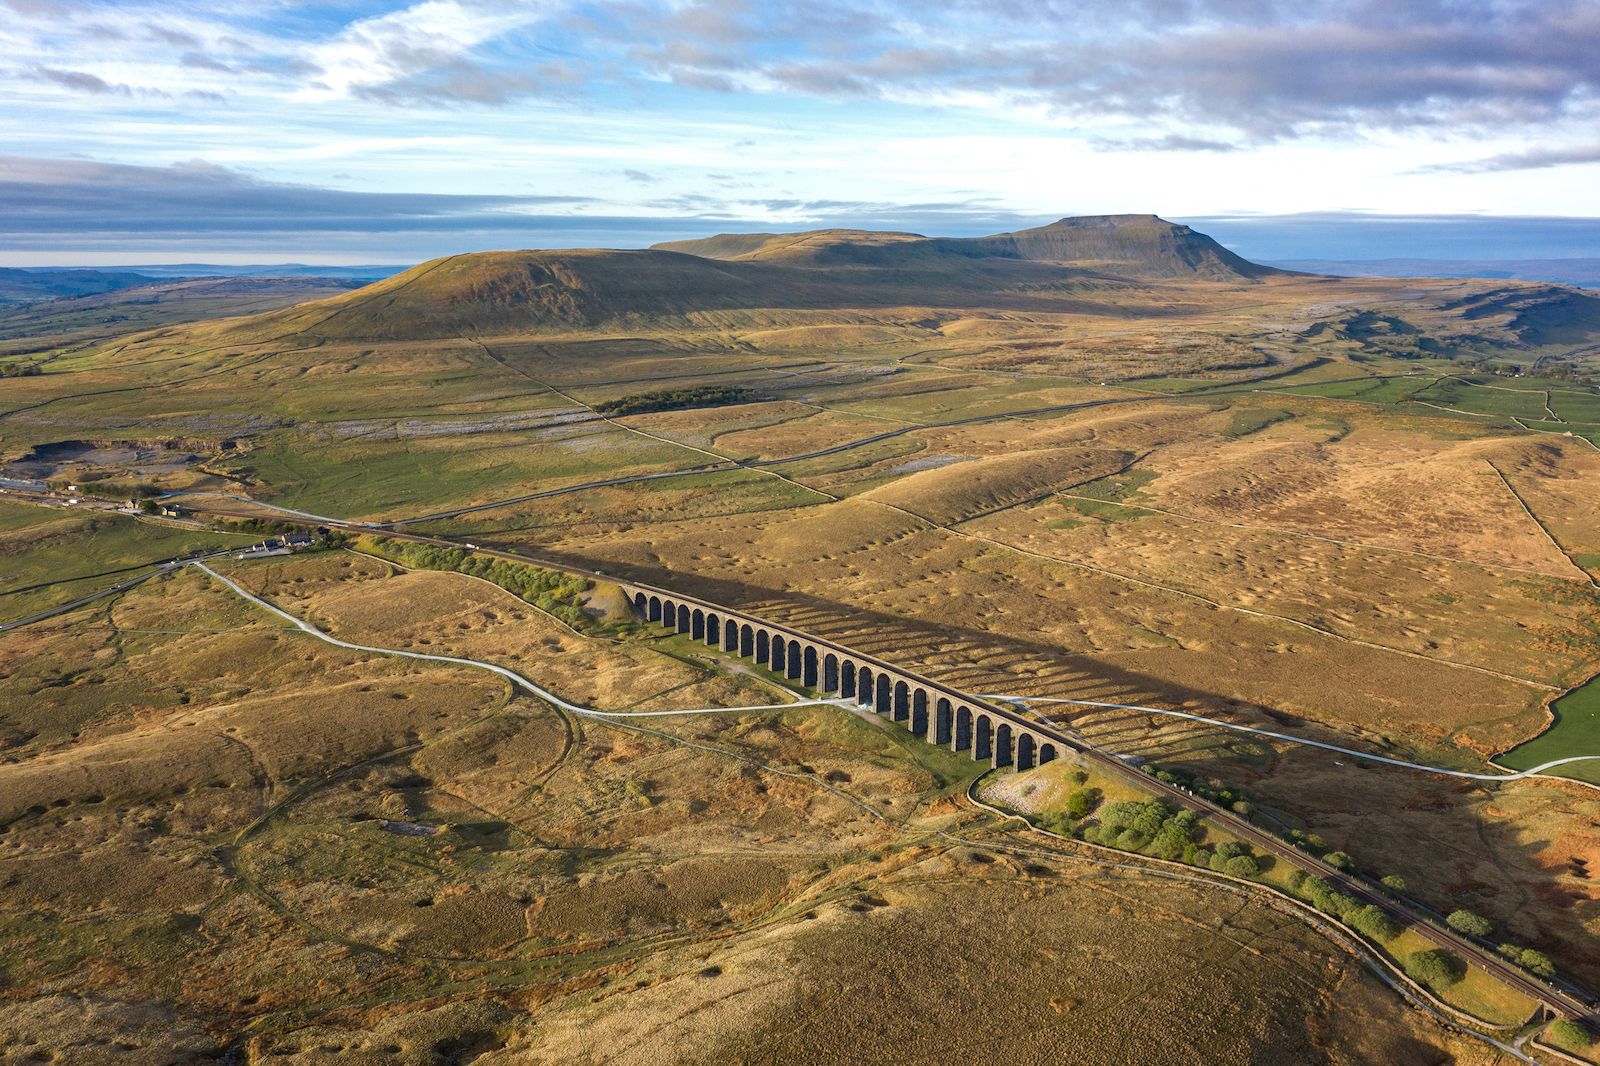 Ingleborough and the Ribblehead Viaduct, in the Yorkshire Dales National Park